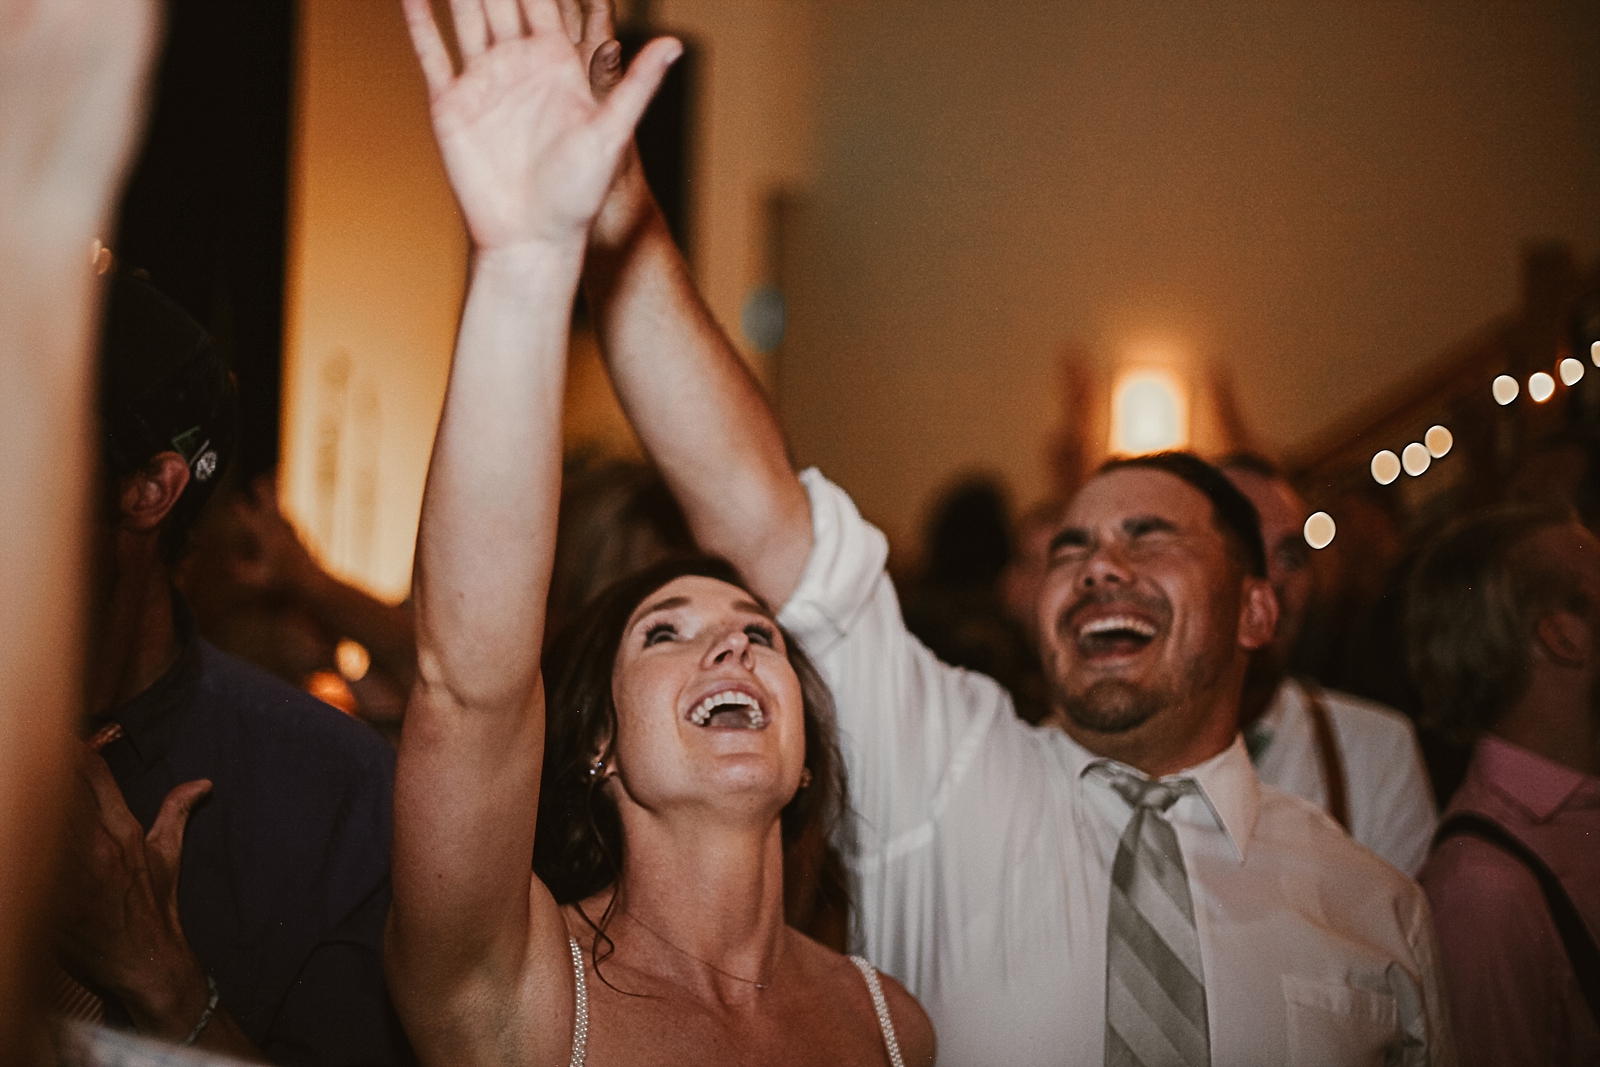 bride and groom dancing, reception at silverthorne pavillion, silverthorne pavillion wedding, silverthorne pavillion wedding photographer, silverthorne colorado wedding photographer